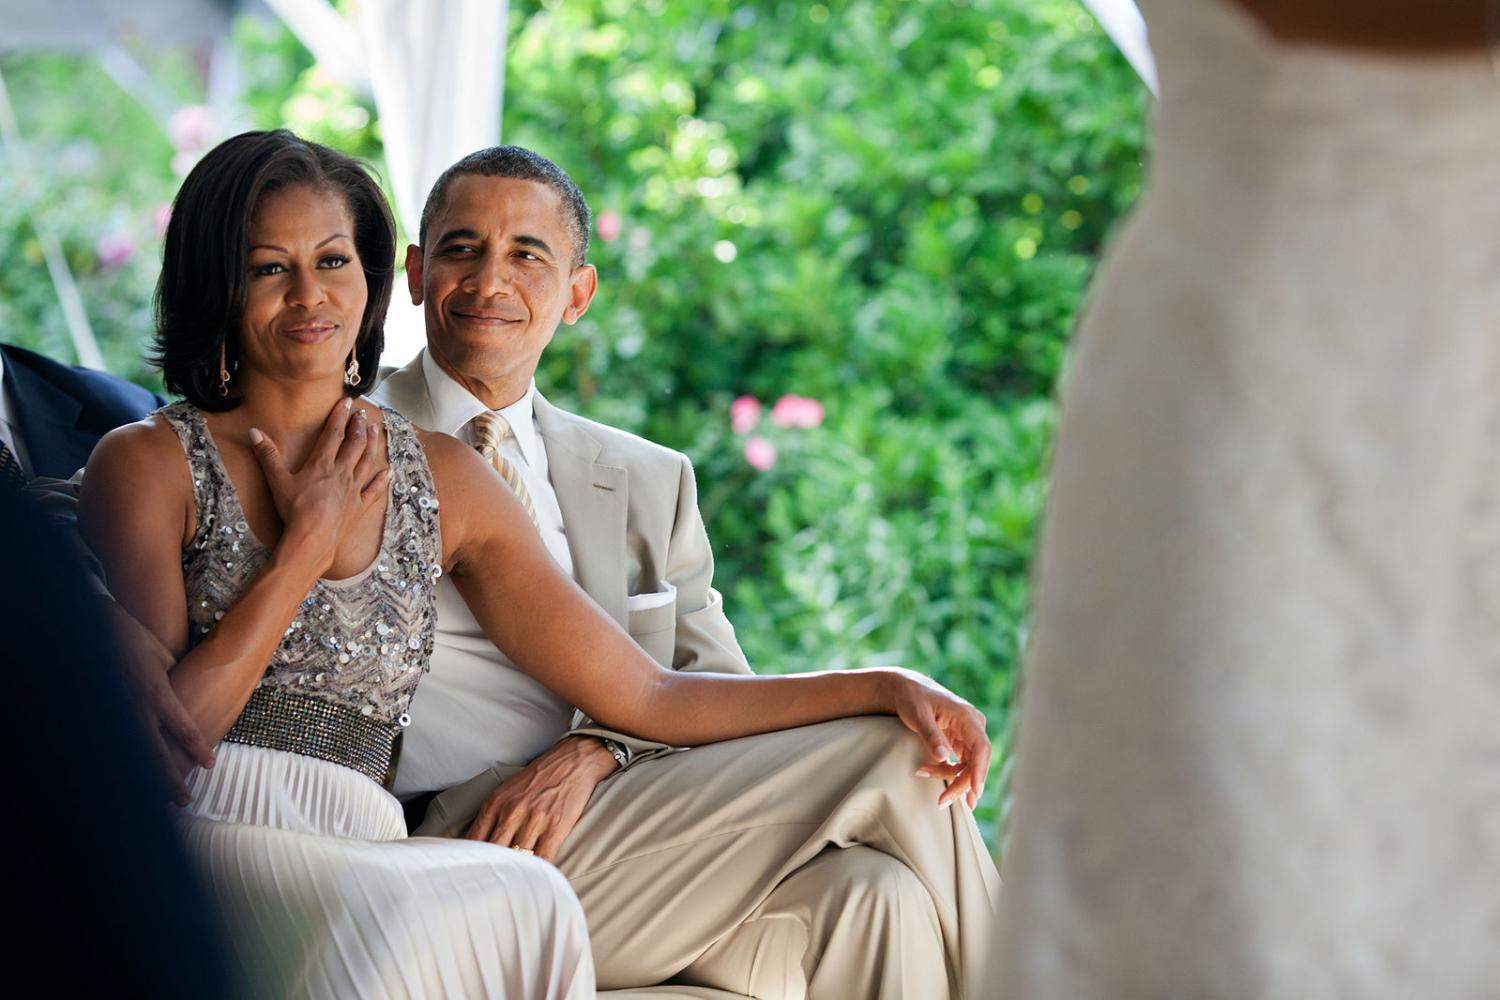 Barack and Michelle Obama were among those recognized by Vanity Fair for their exemplary fashion choices.